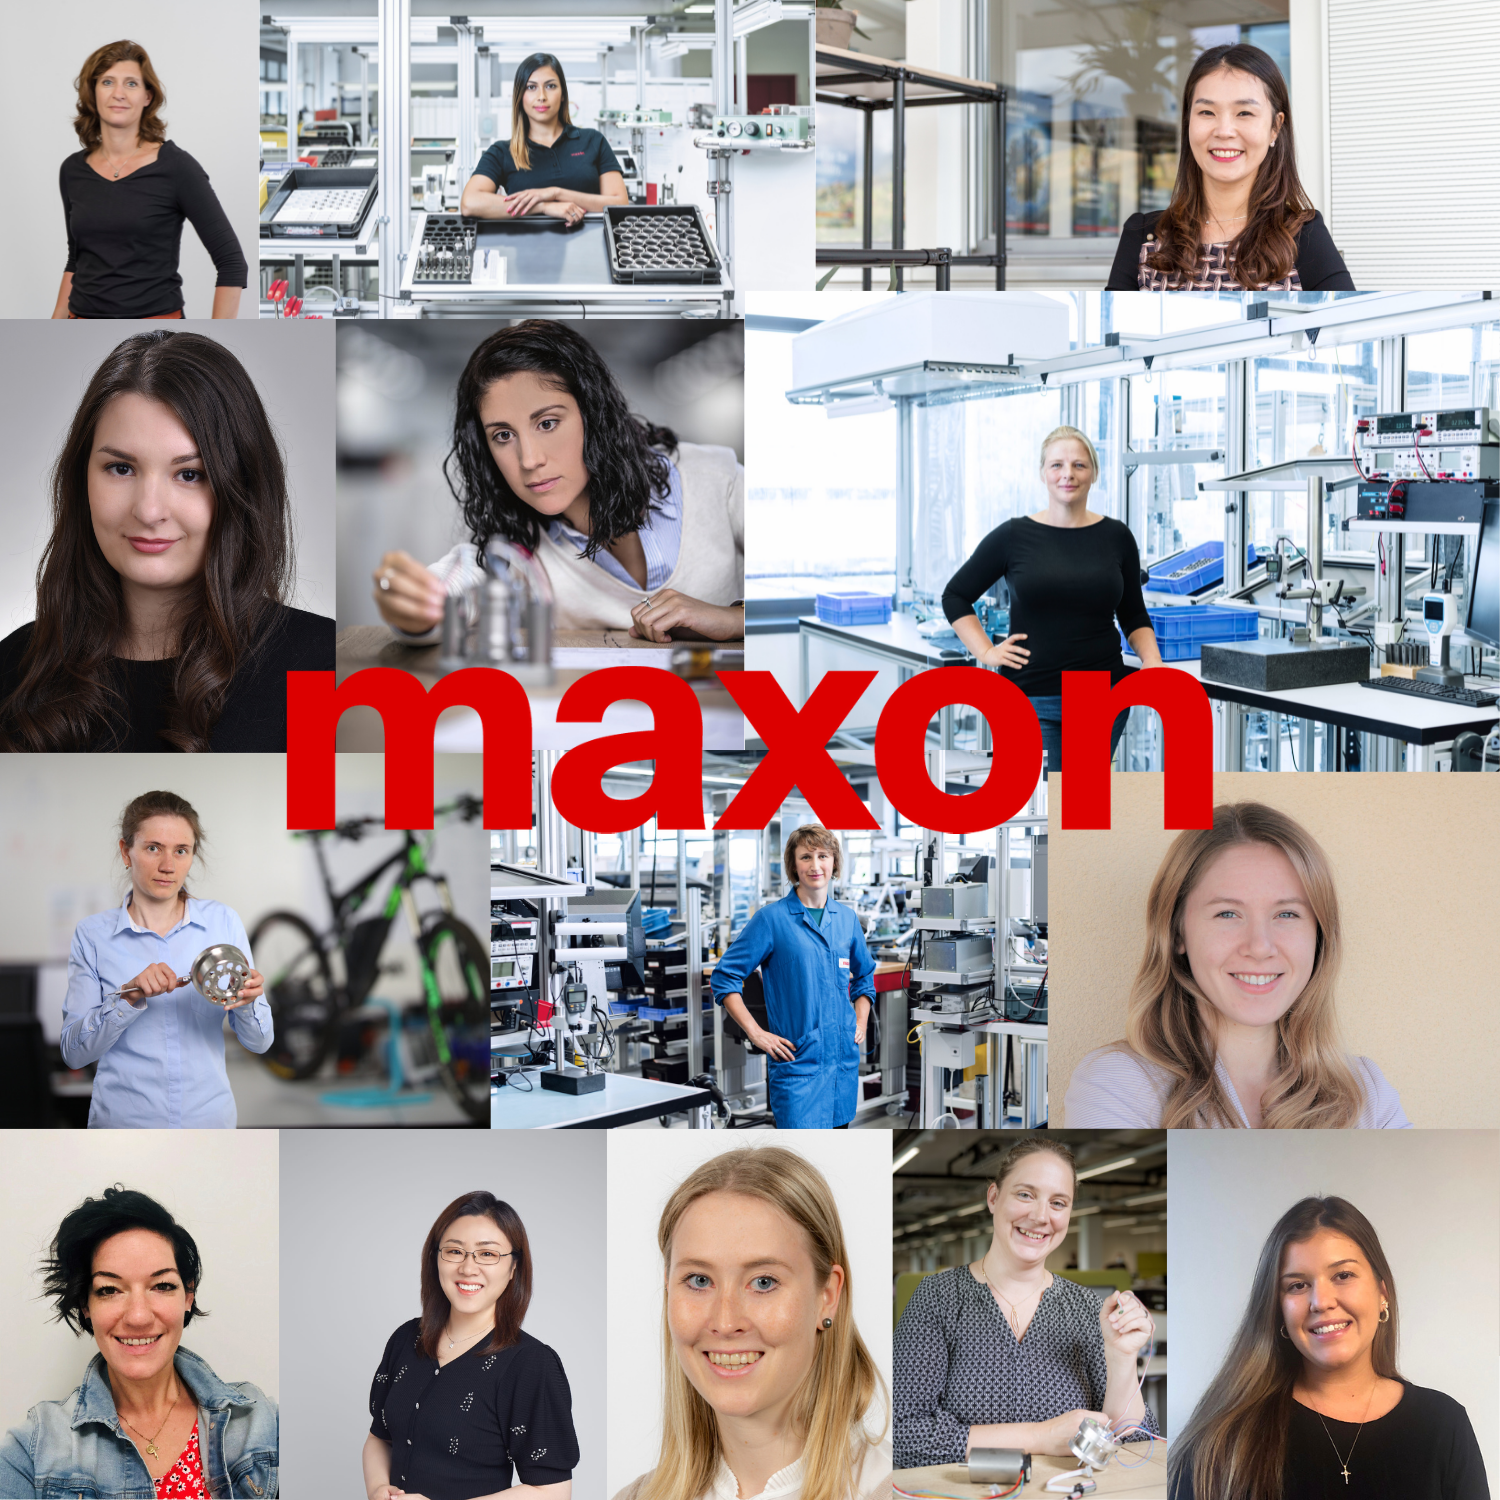 Around the globe, the maxon women in engineering are working on motion control applications with their customers, they focus on new product designs to implement the latest technologies and continue to research new concepts and ideas for drive systems to be used in motion control applications found in Medical, Industrial Automation, Aerospace and Defense, and Mobility industries